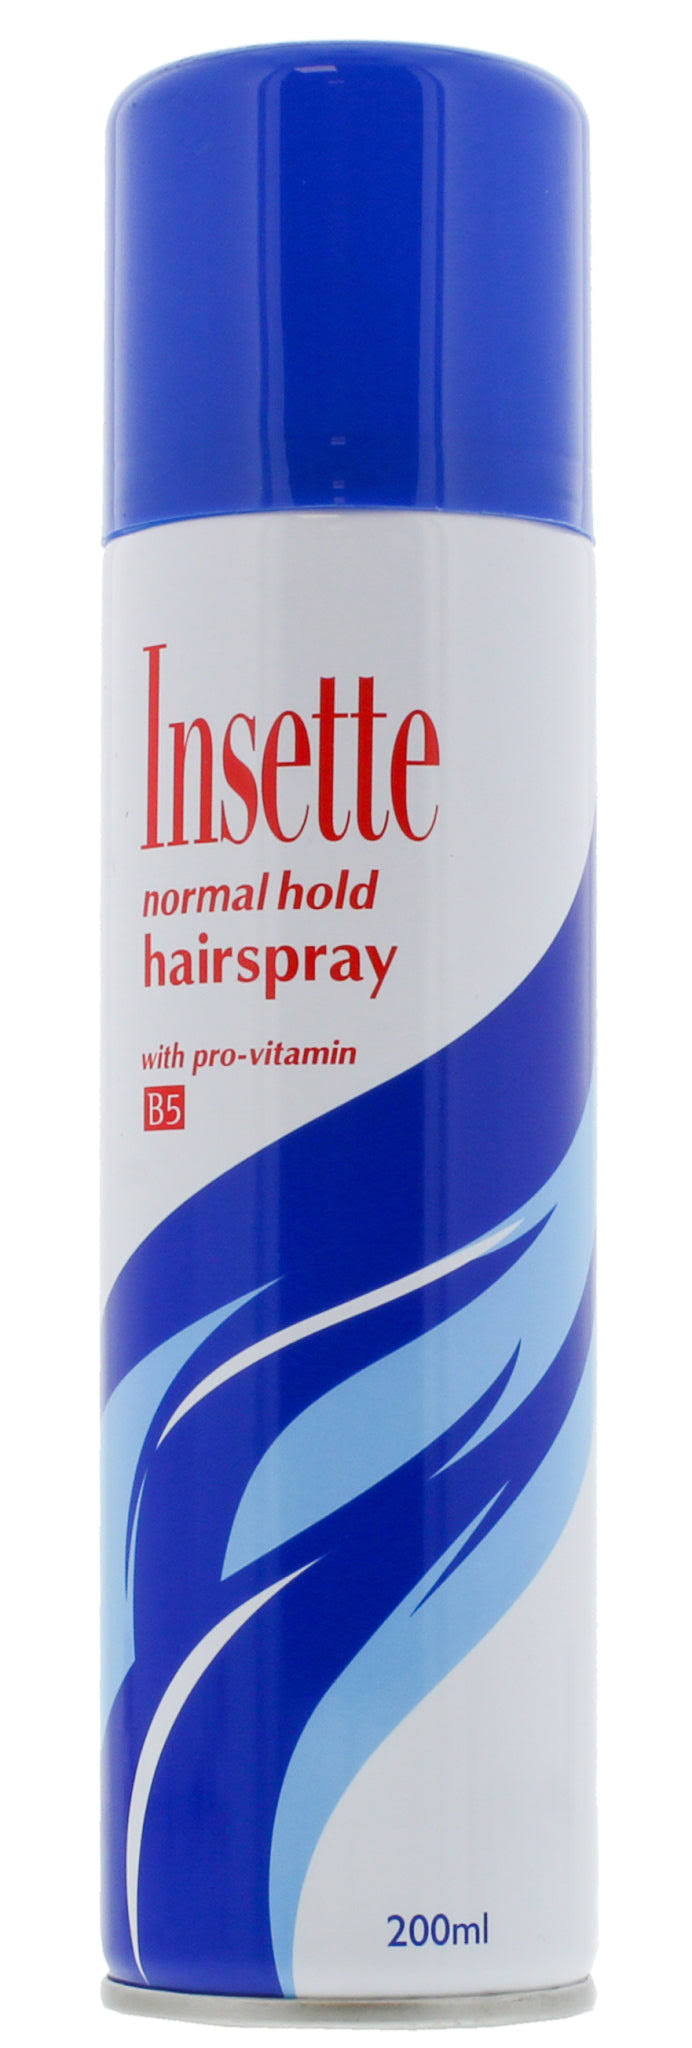 Insette Hairspray Normal Hold 200ml